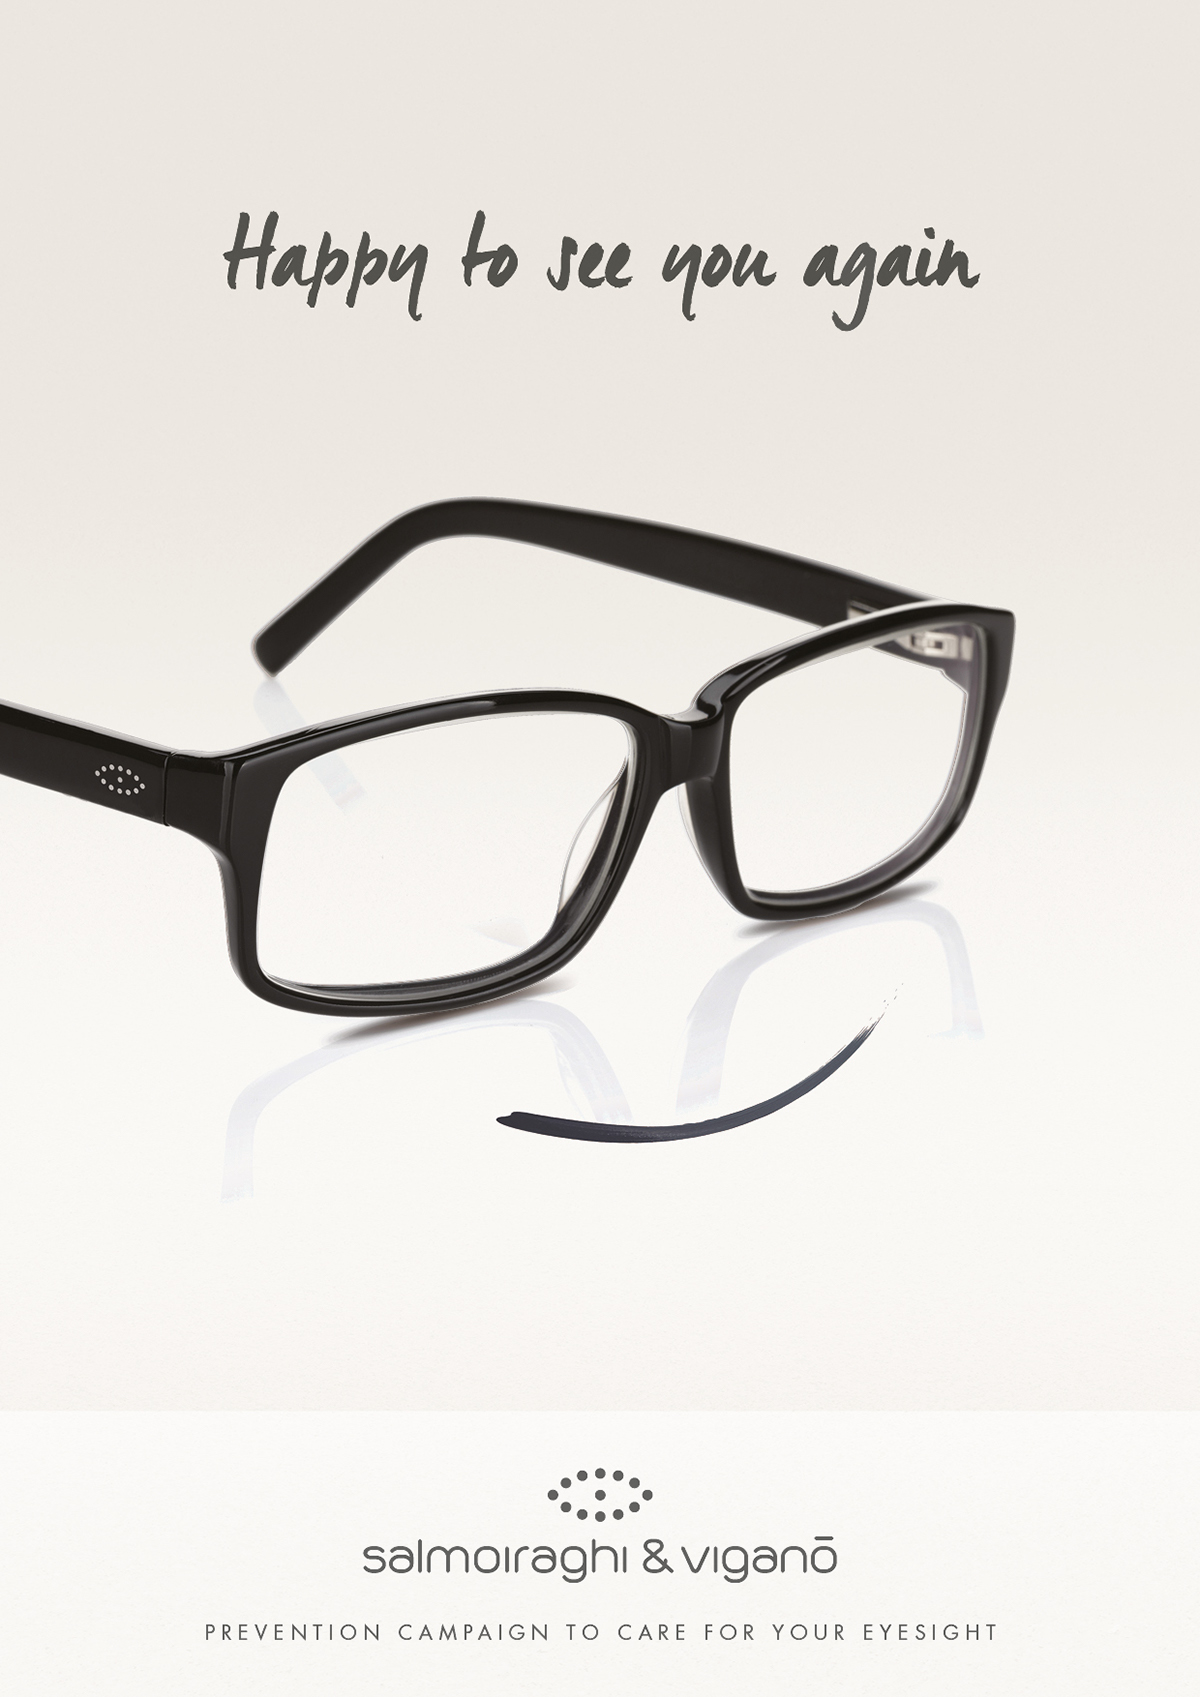 Advertising  campaign sight care prevention eye glasses company print billboard